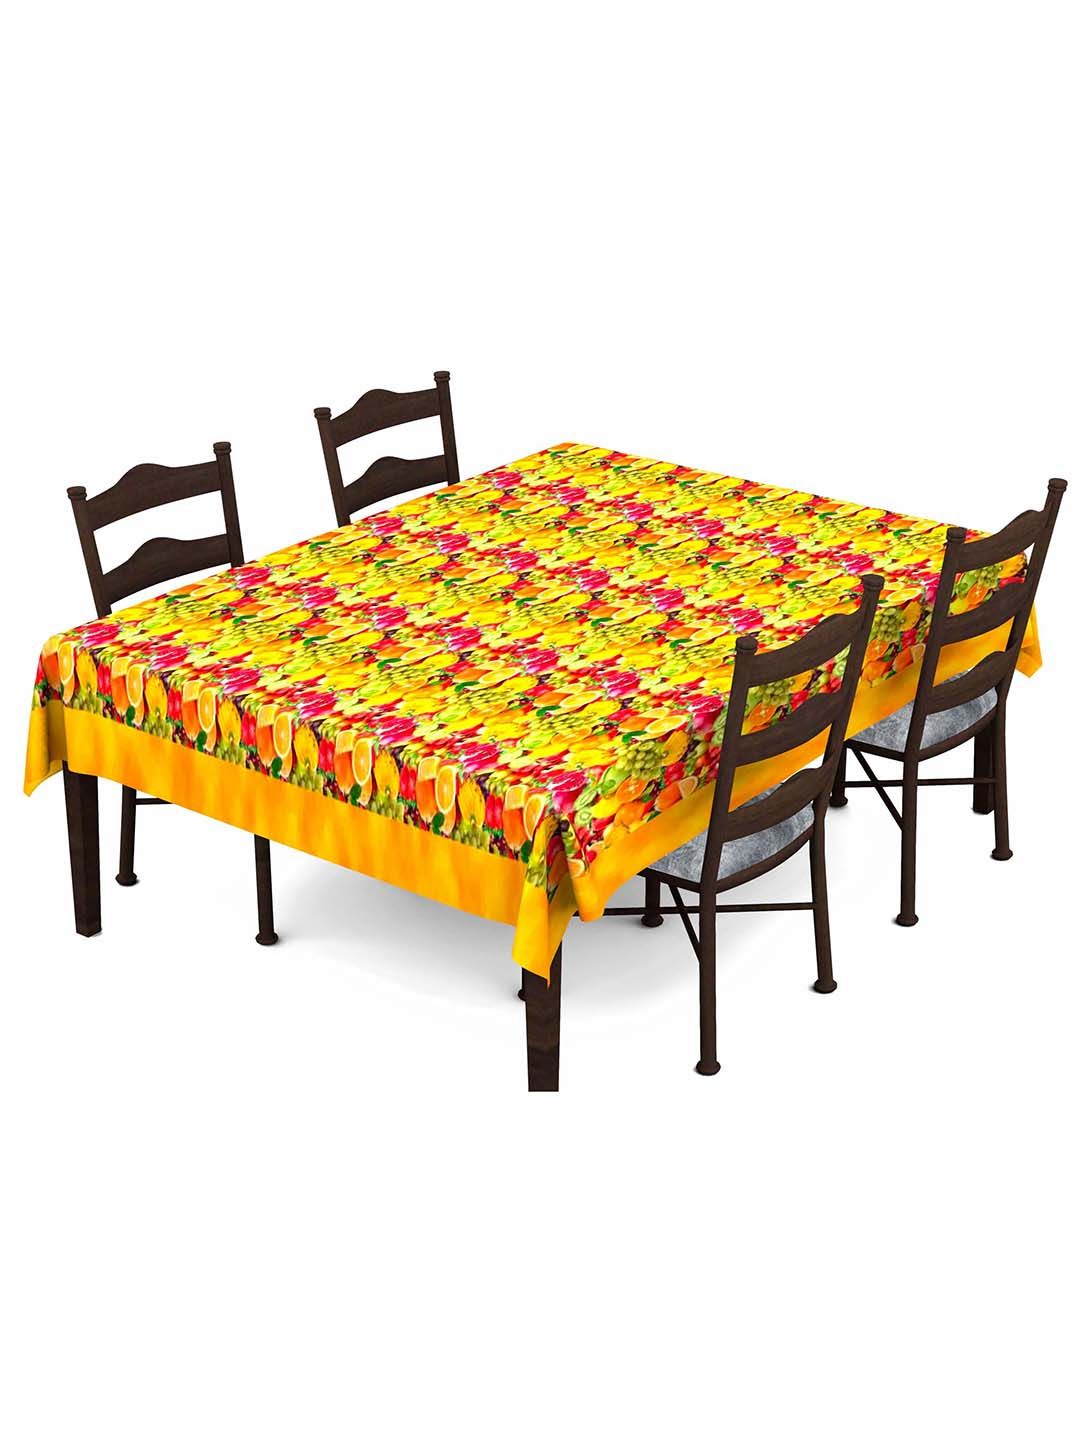 Lushomes Yellow Digital Printed 6 Seater Table Cover Price in India